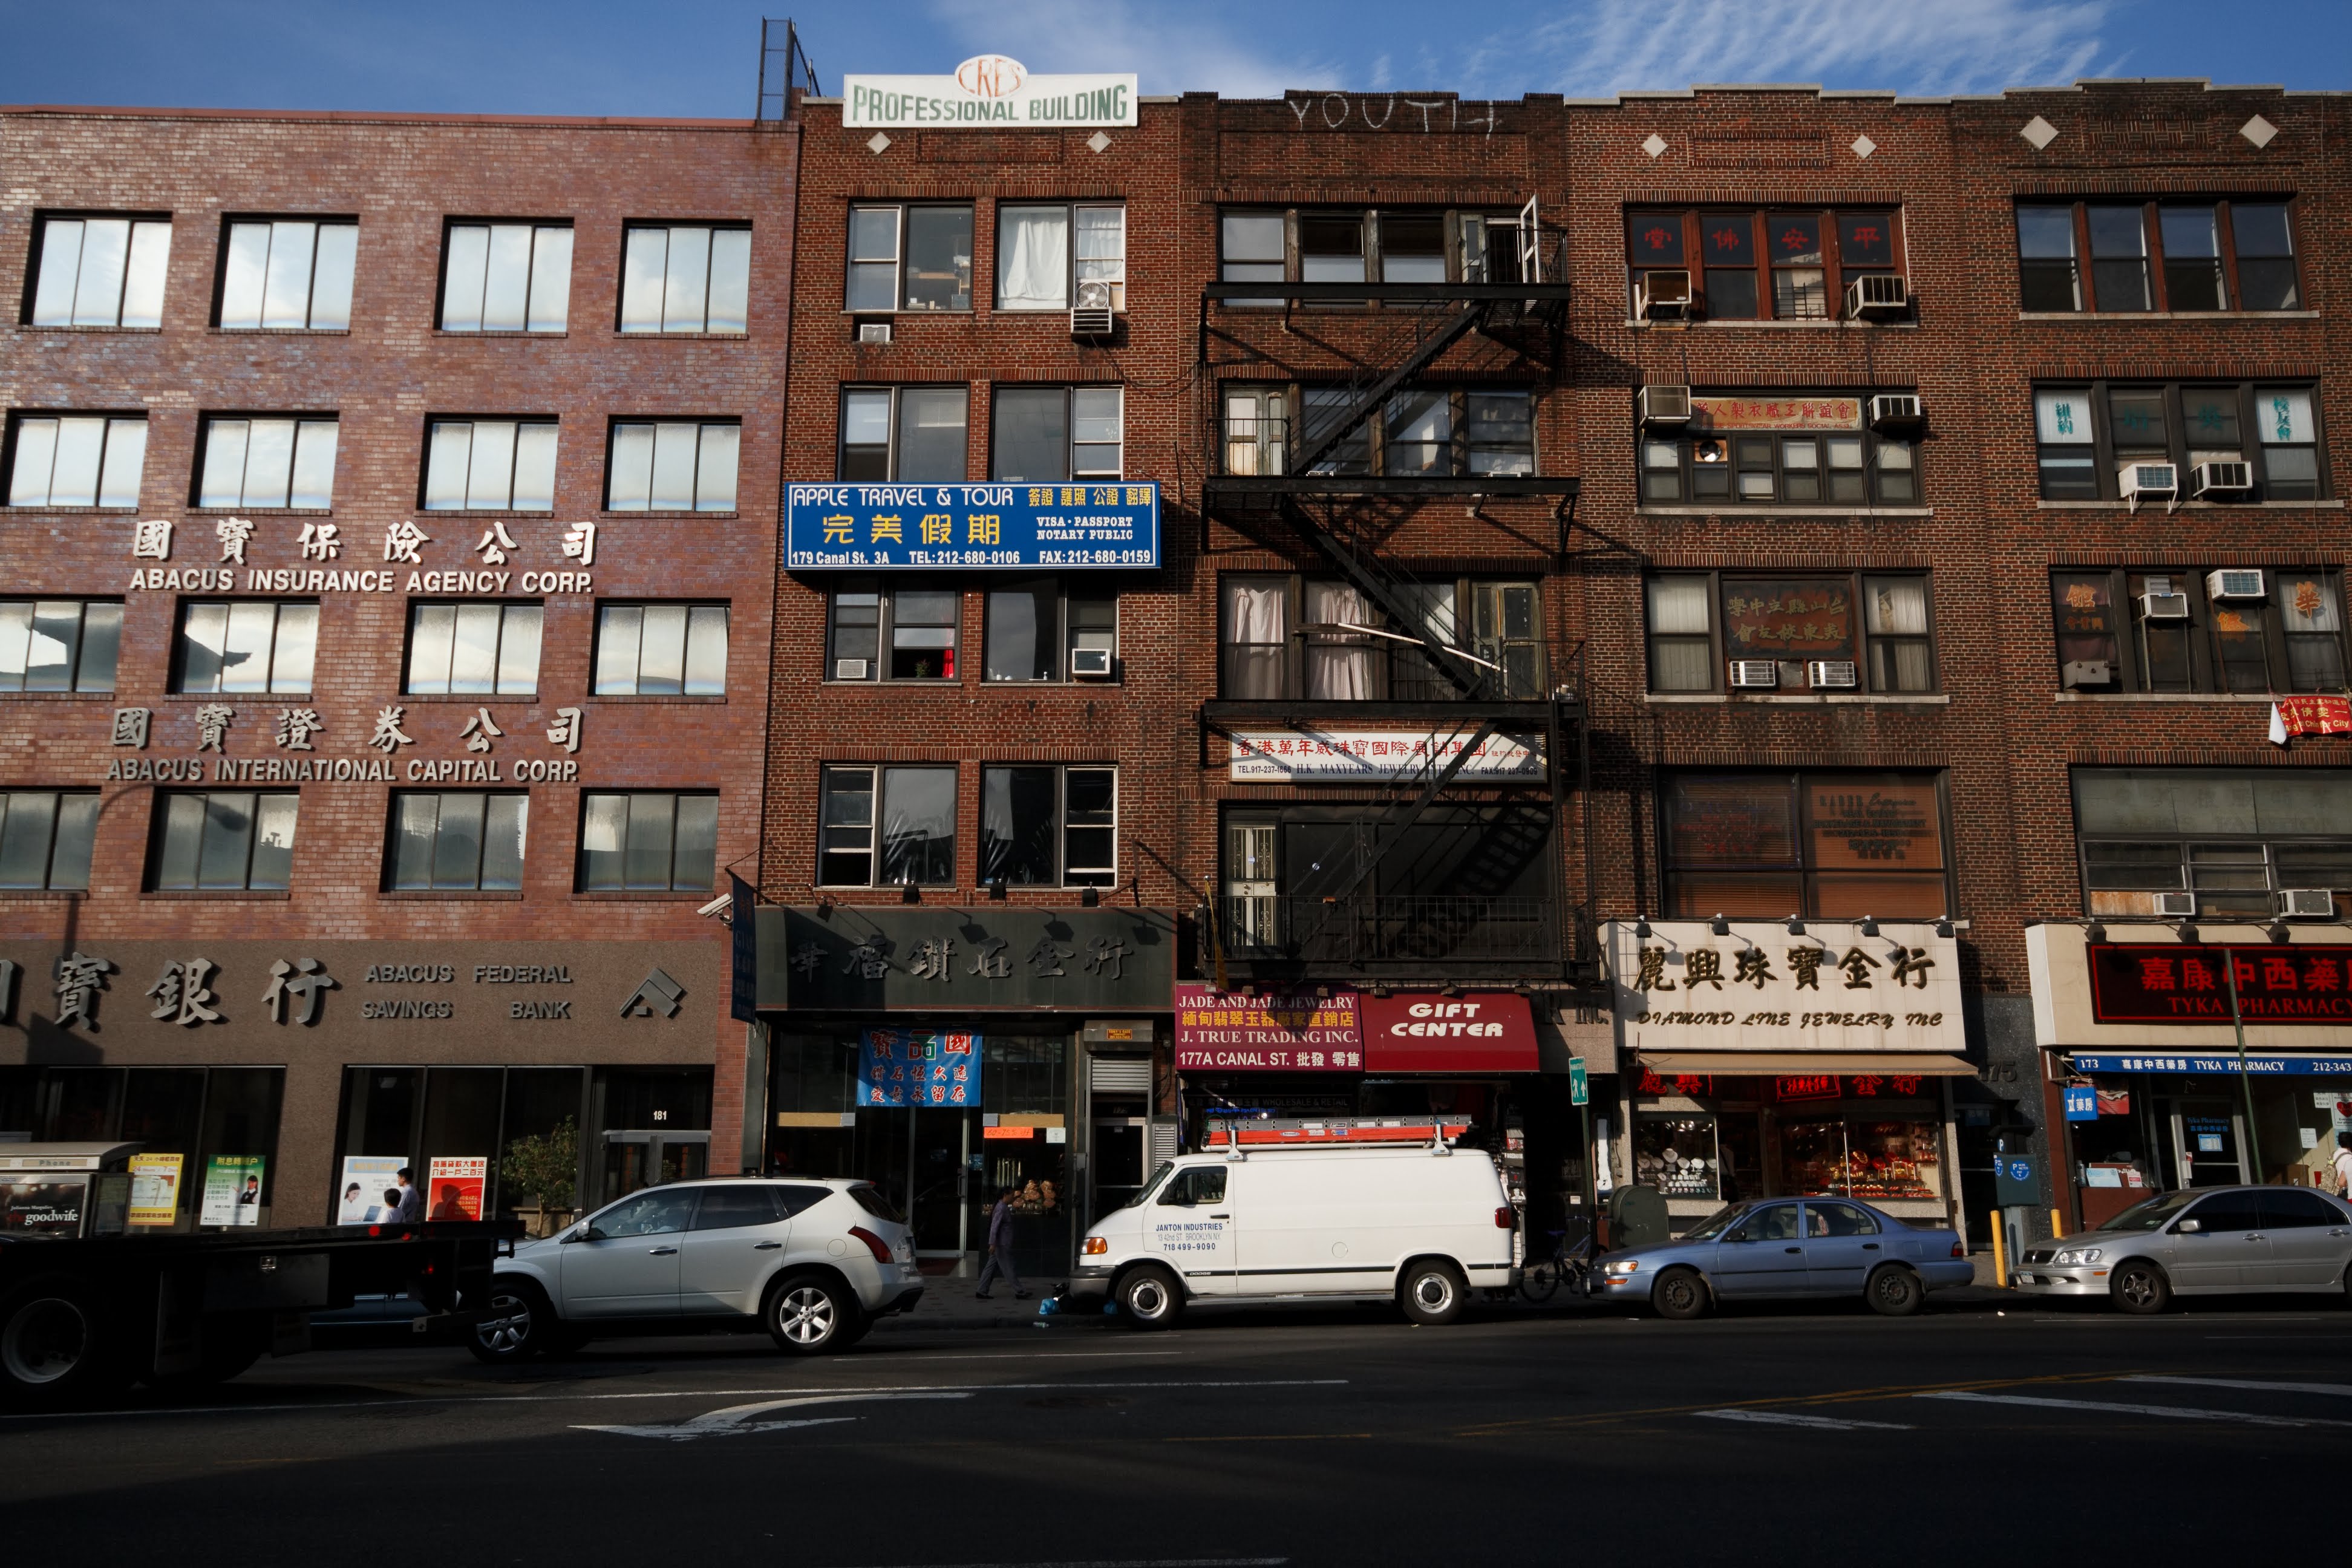 Commercial building in NYC Chinatown